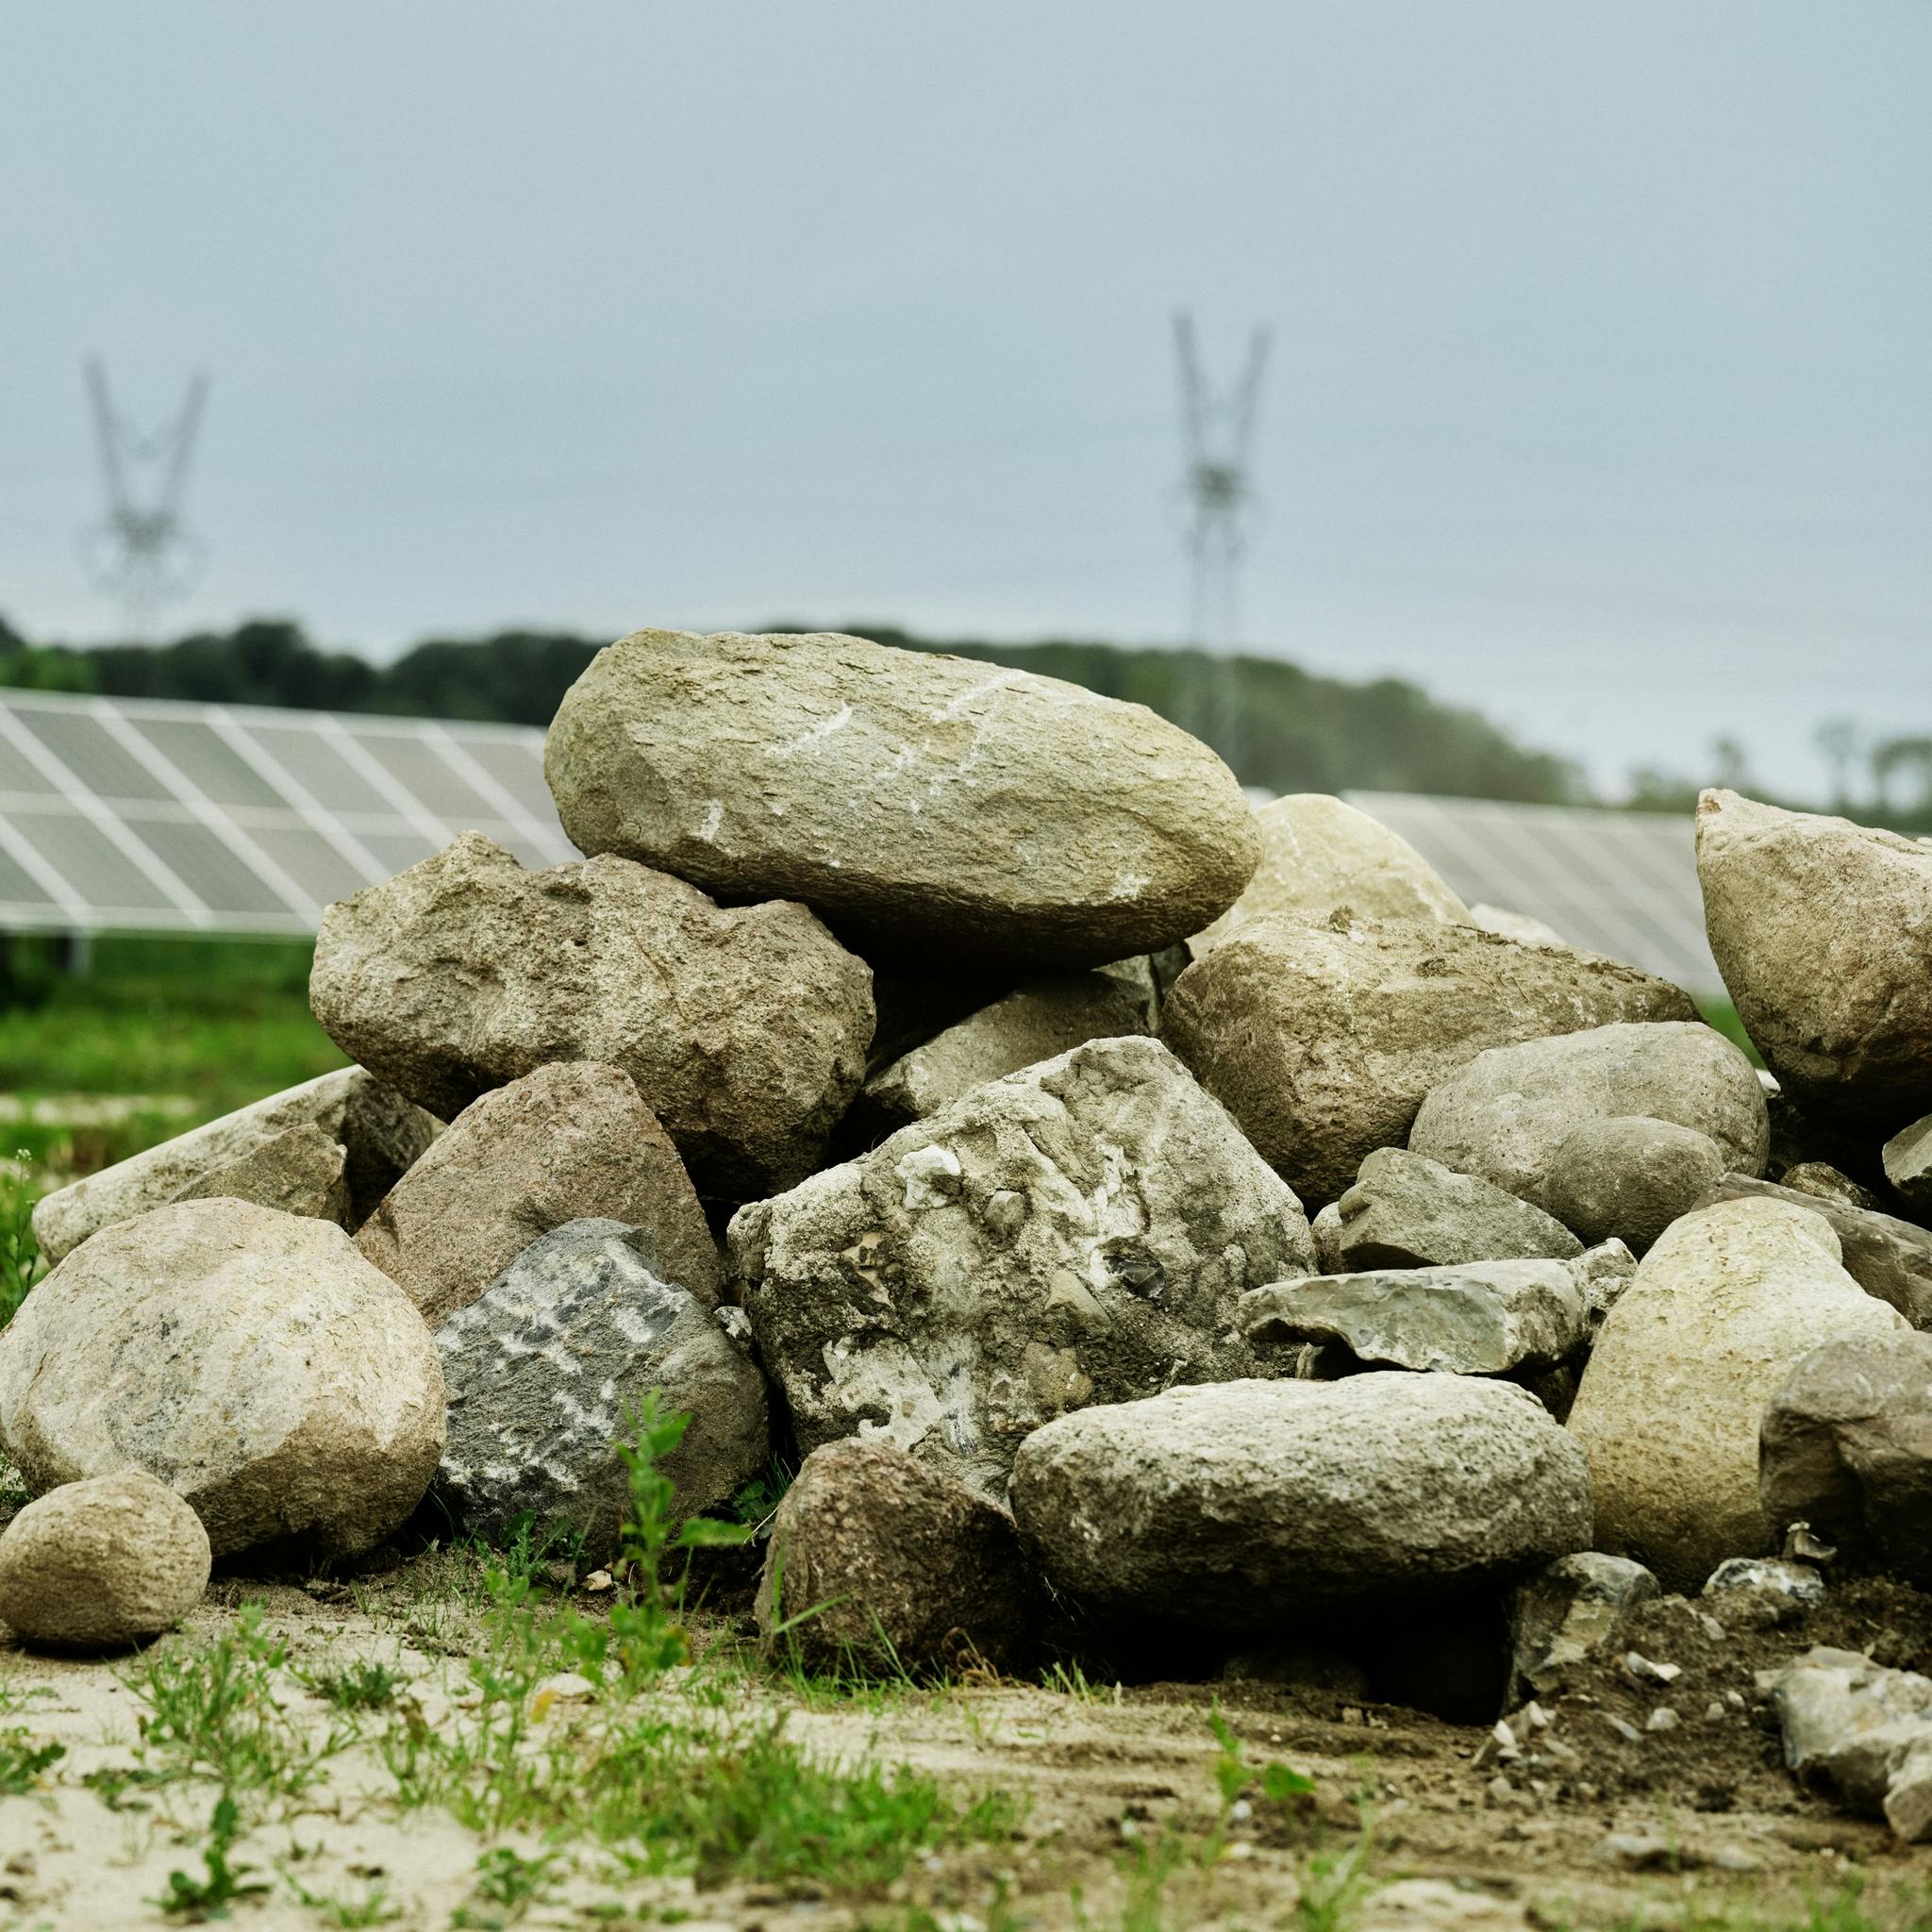 Stones in a solar park